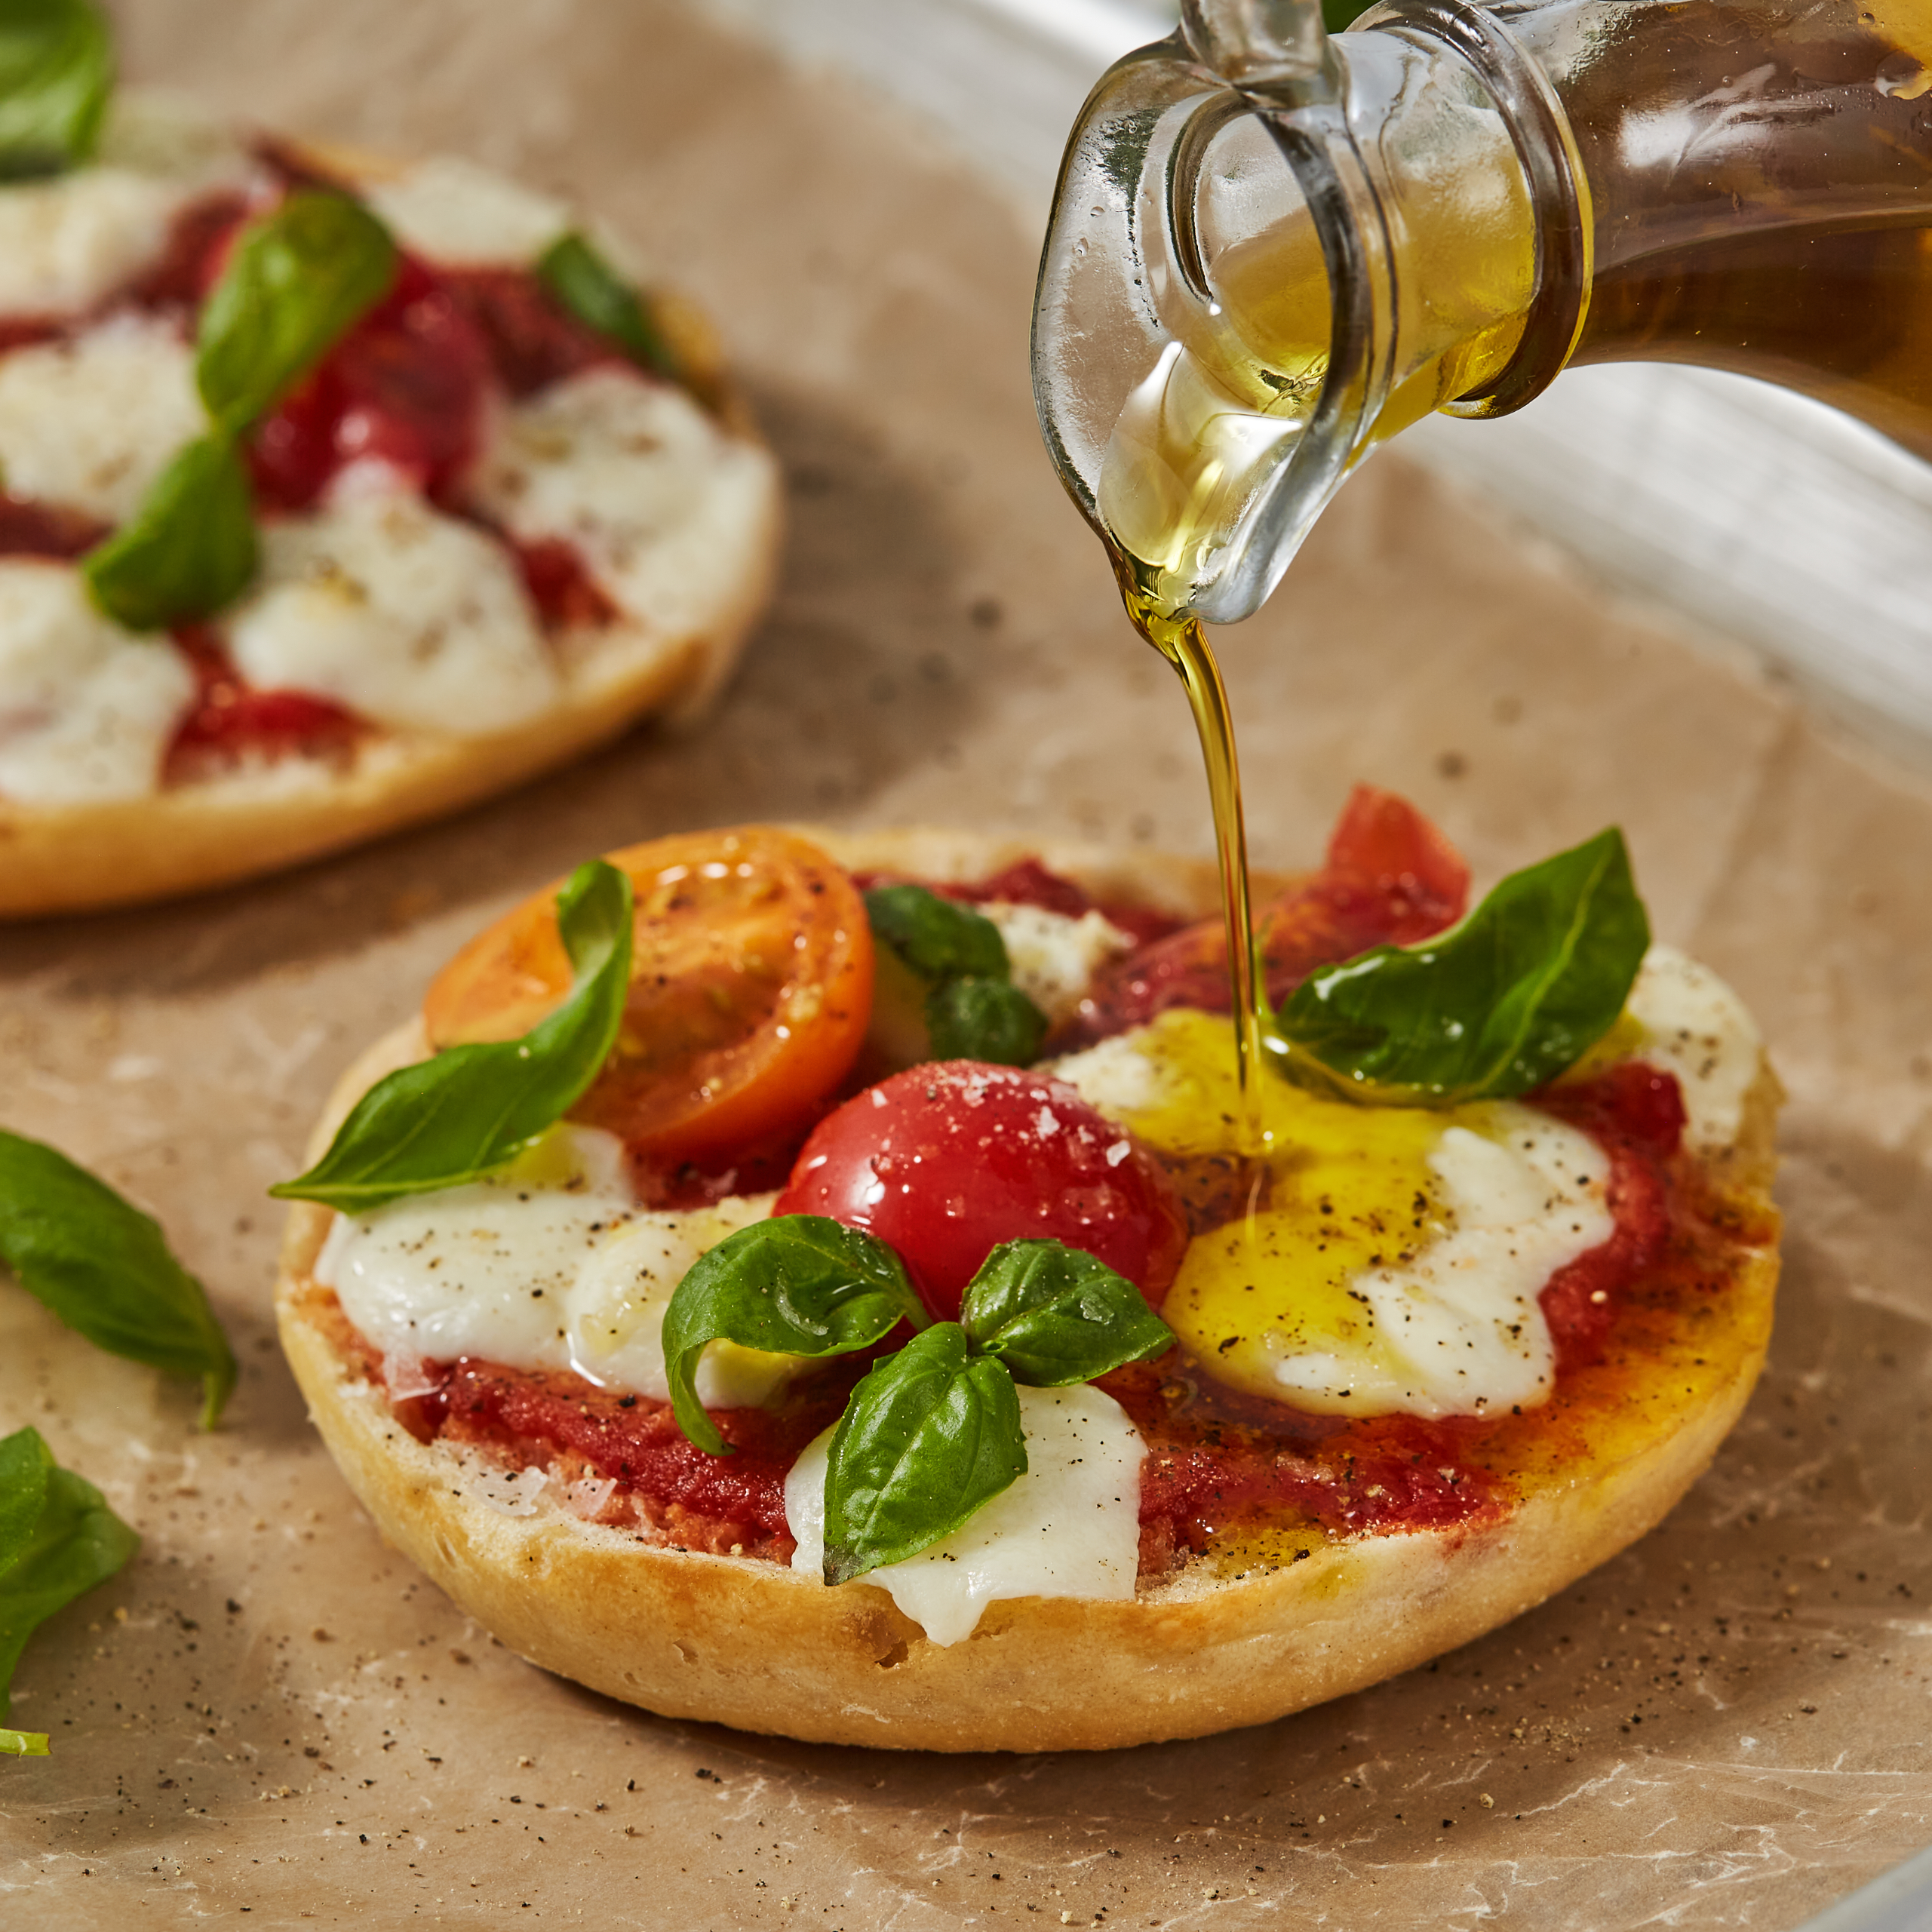 A small pizza made on a RUSTICA brand round bun. The small pizza is being drizzled with olive oil.